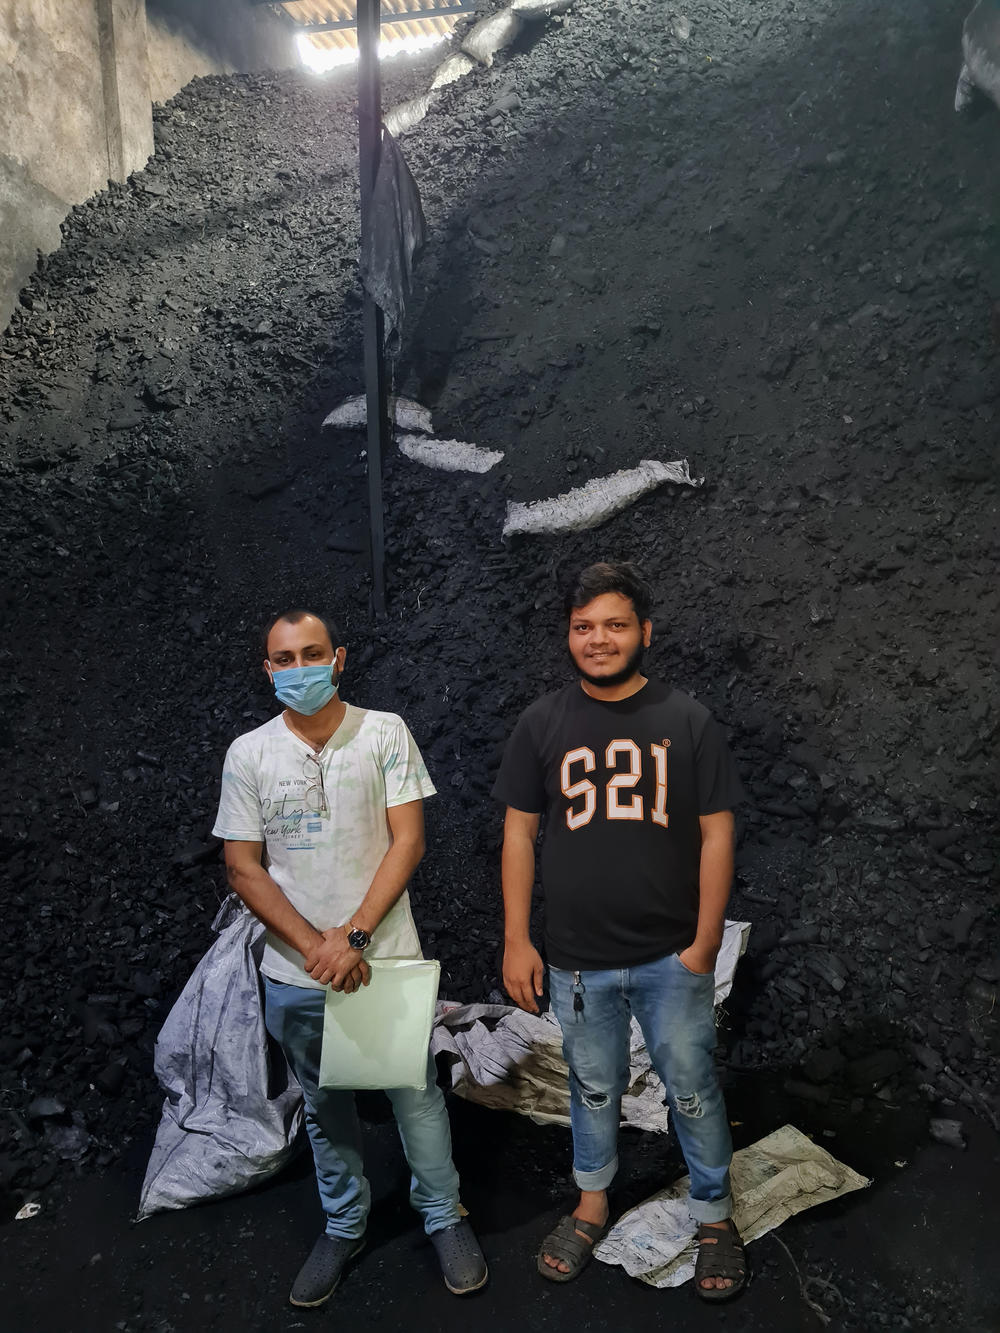 Abdul Moeed Chaudhary (left), 30, and his nephew Abdul Rakib Chaudhary (right), 21, are the third and fourth generations of their family to run the Choudhury Coal Depot in Mumbai. Abdul Moeed Chaudhary recently earned a master's degree in renewable energies, and wants to diversify the family business.